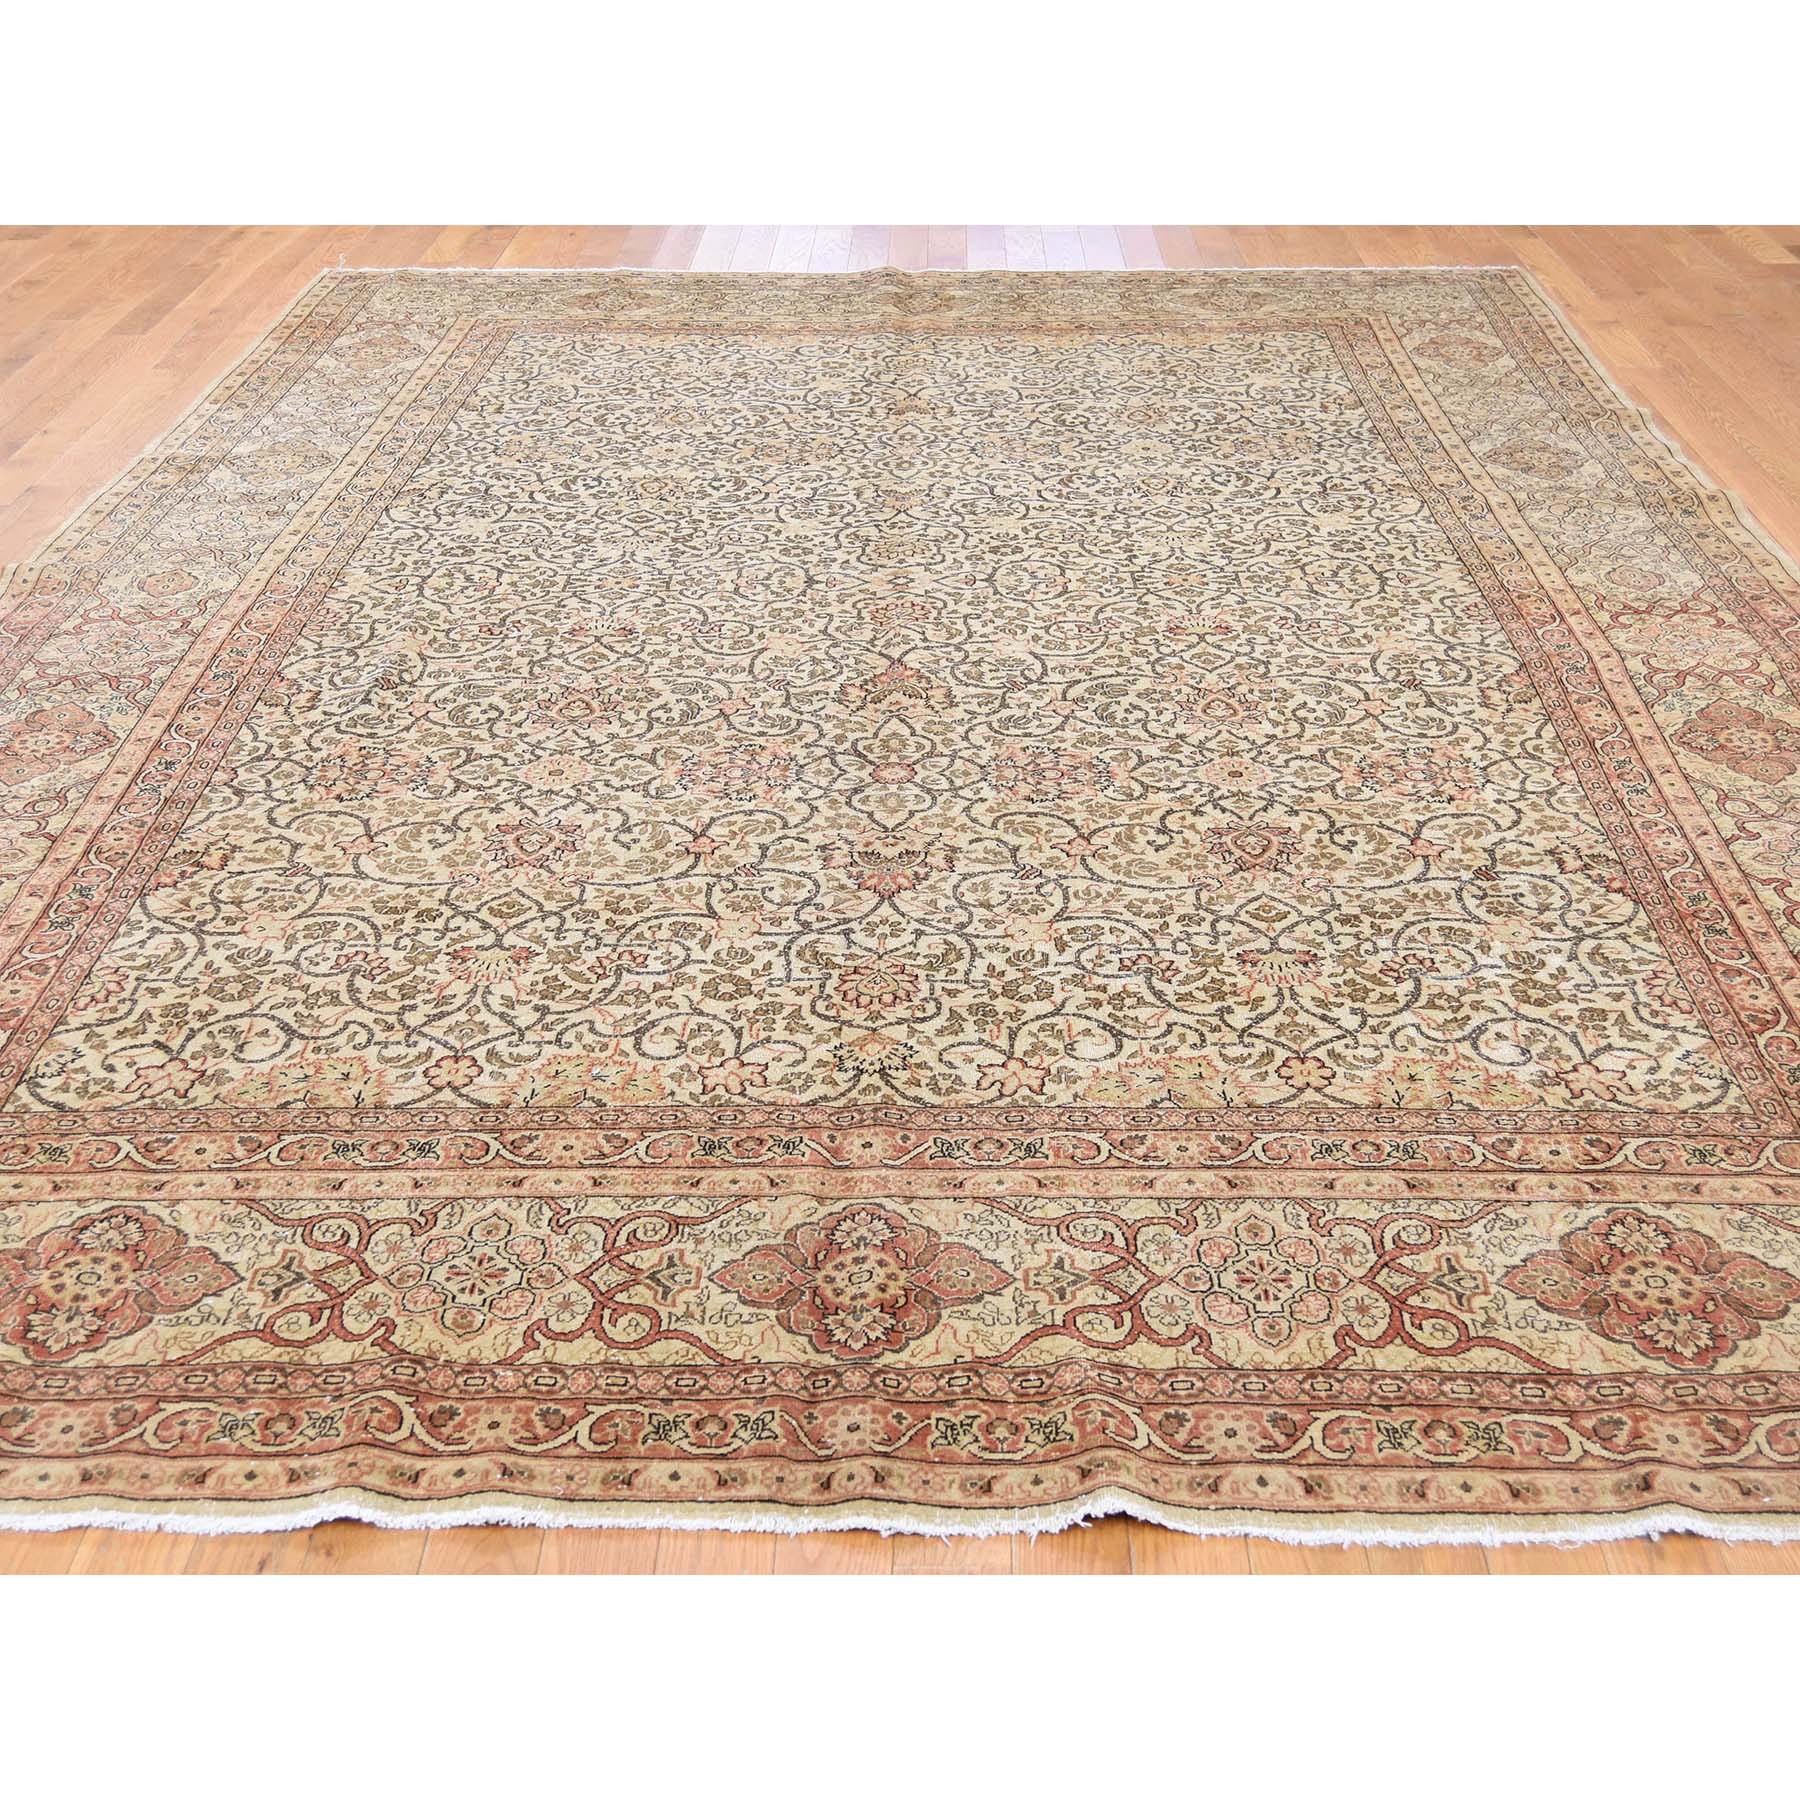 8-6 x12-1  Antique Persian Tabriz Hand Knotted Pure Wool Full Pile Rug 